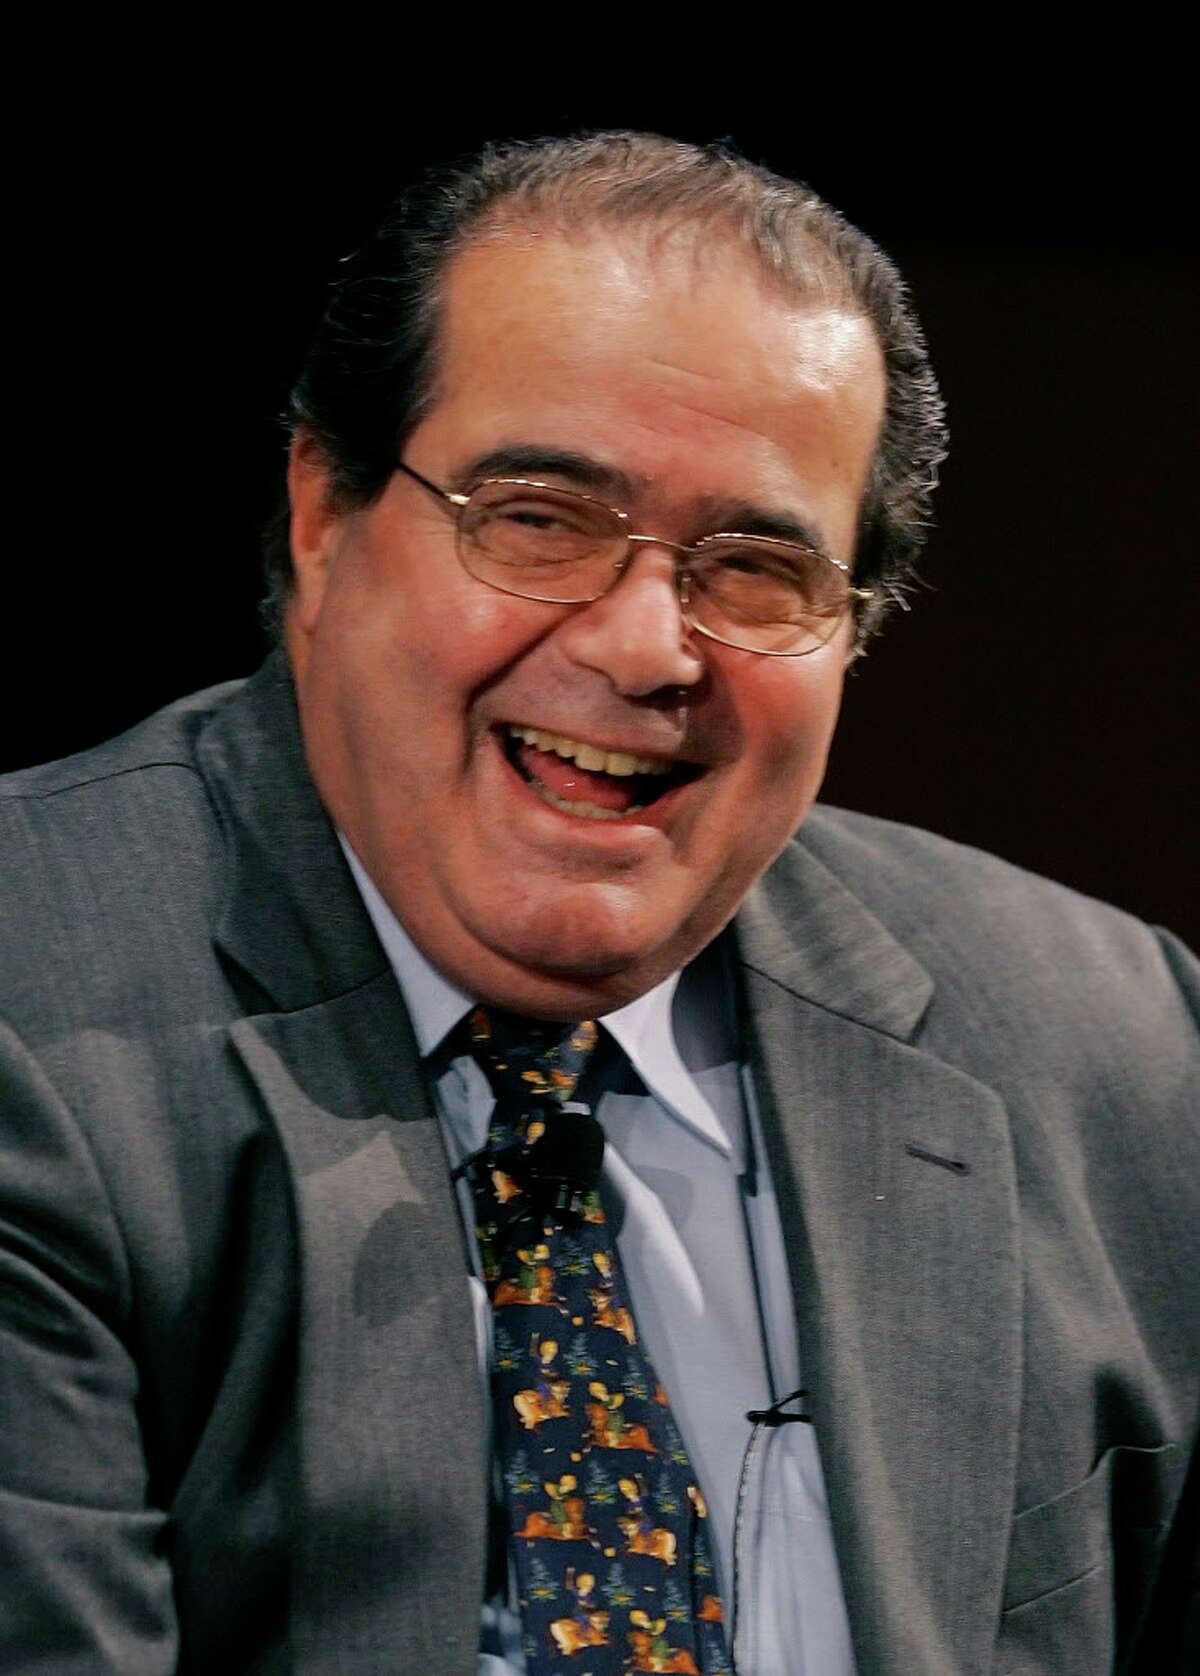 FILE - In this Wednesday, Jan. 10, 2007 file photo, Supreme Court Justice Antonin Scalia smiles during his introduction at the Intercontinental Hotel in Cleveland, as part of a Cleveland Clinic speakers series. On Saturday, Feb. 13, 2016, the U.S. Marshals Service confirmed that Scalia has died at the age of 79. (AP Photo/Mark Duncan) ORG XMIT: NYAS107